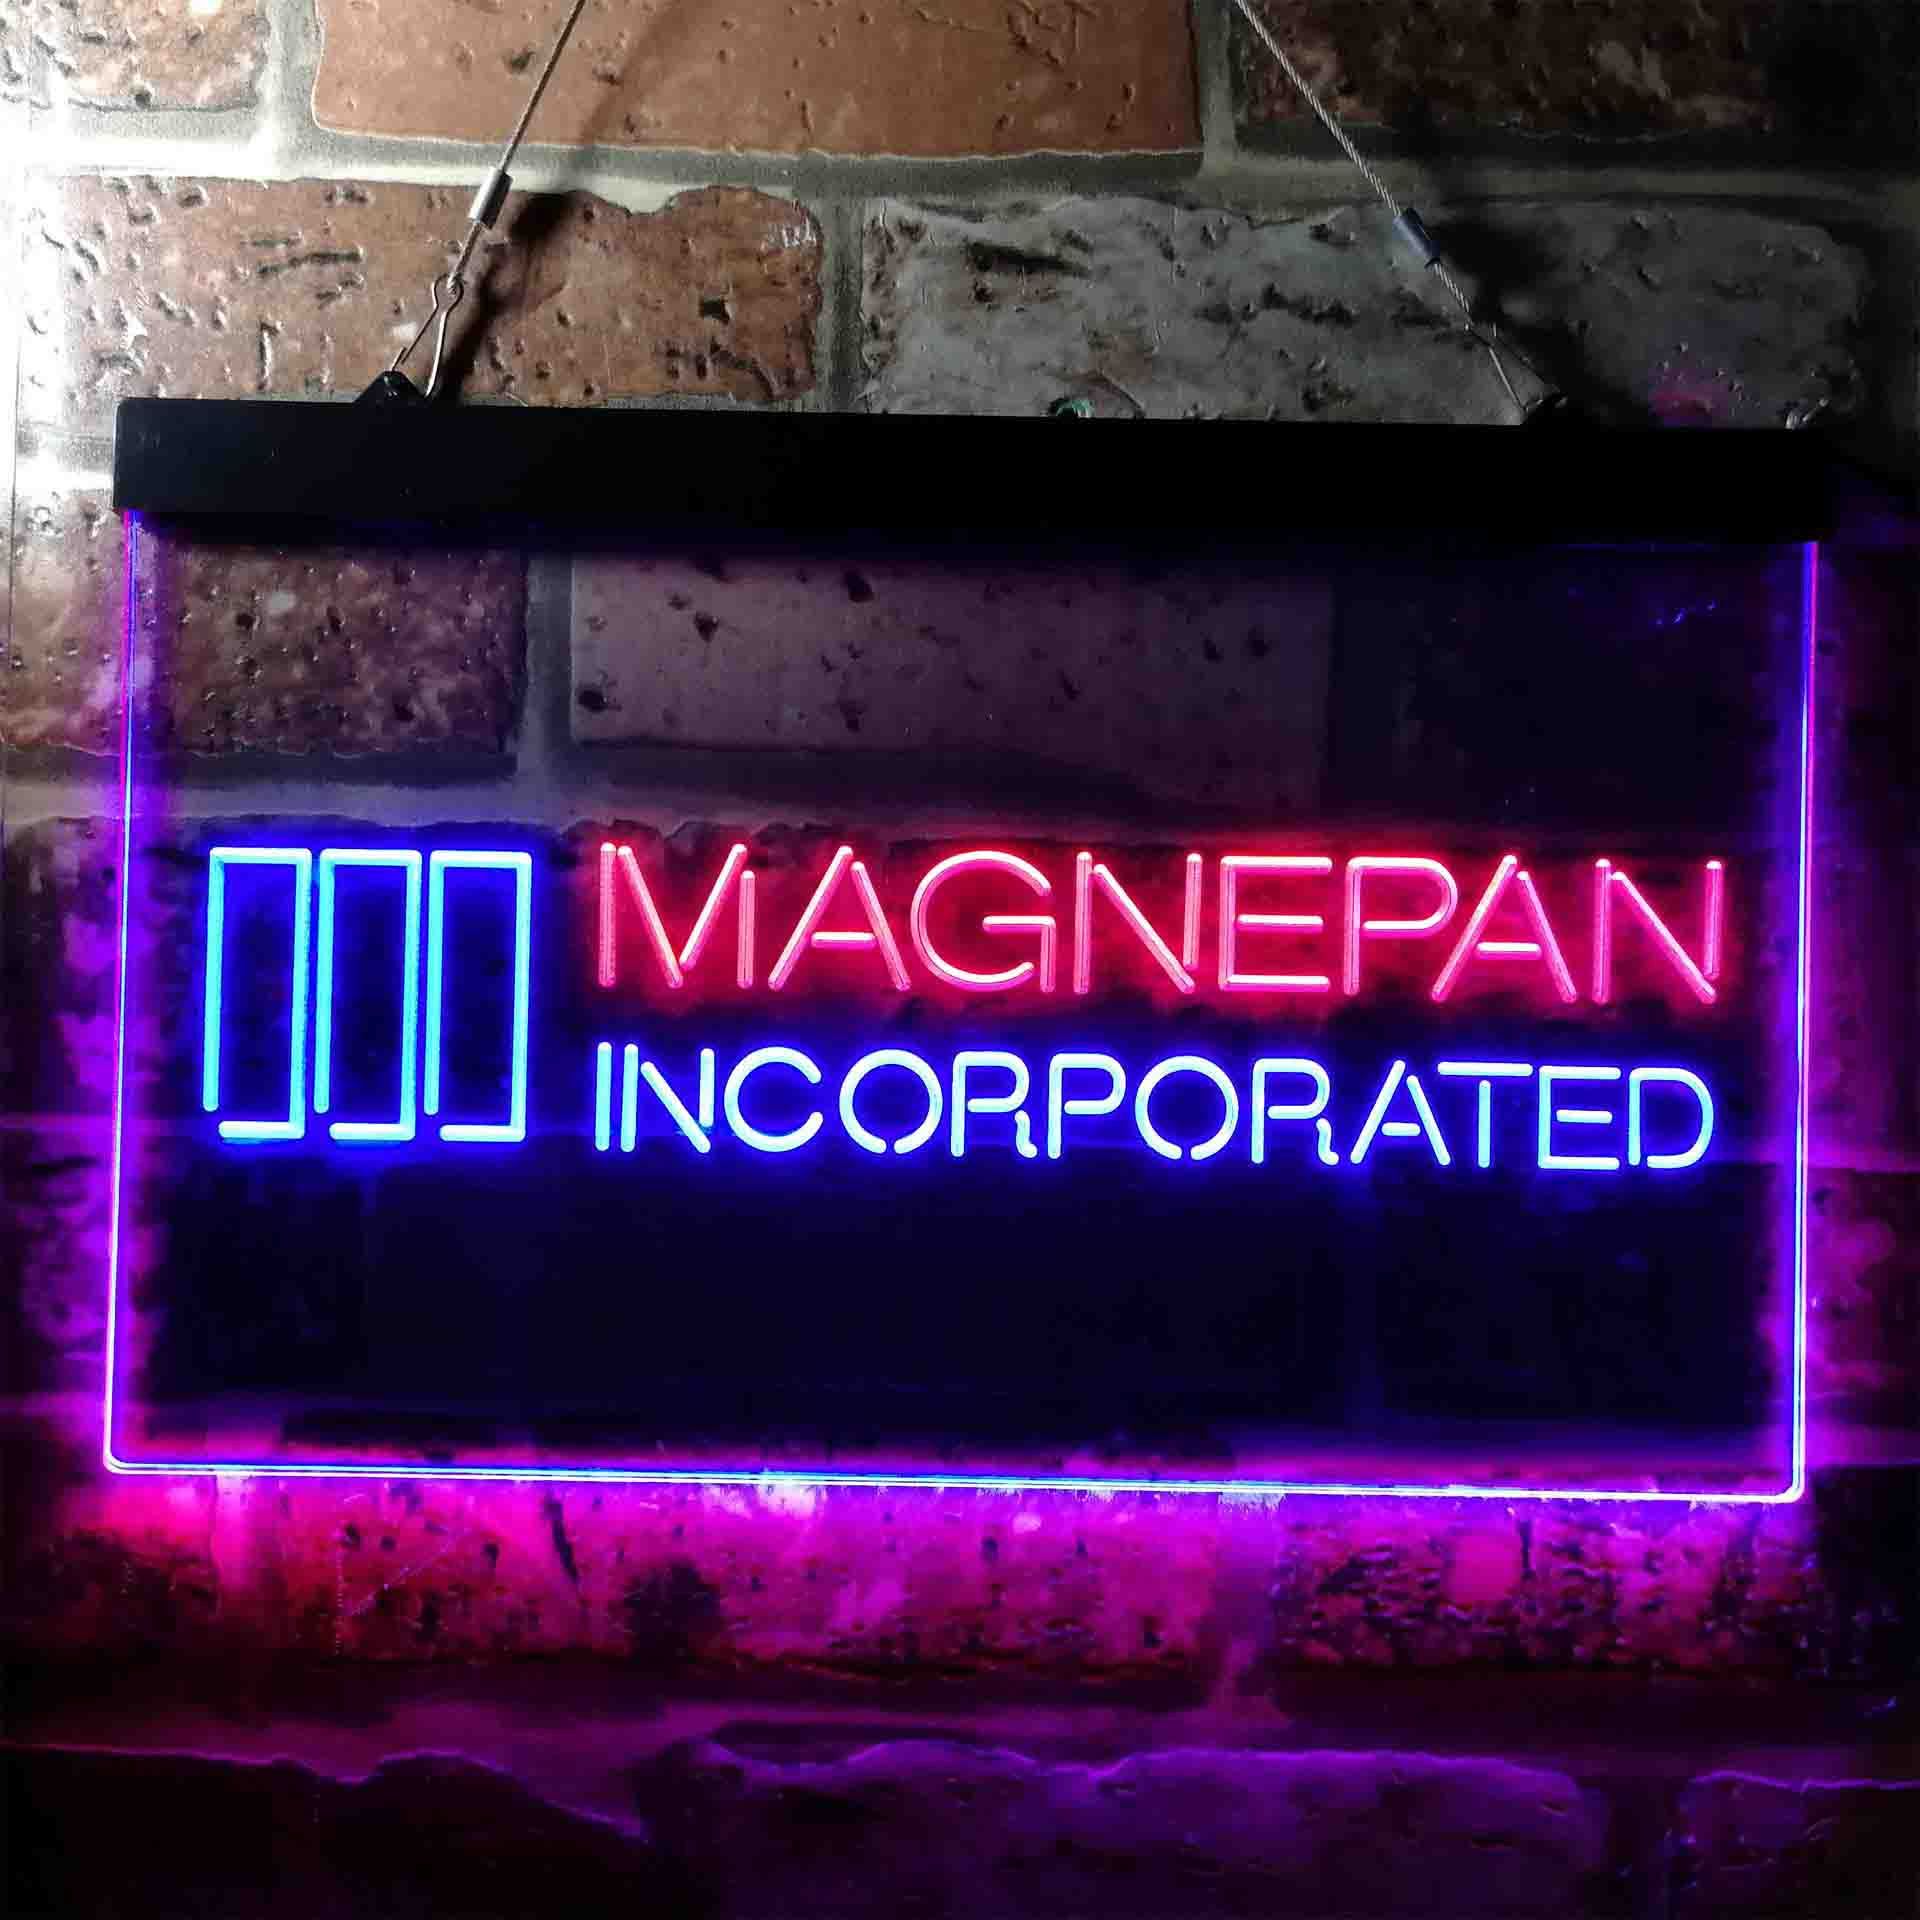 Magnepan Incorporated Dual LED Neon Light Sign